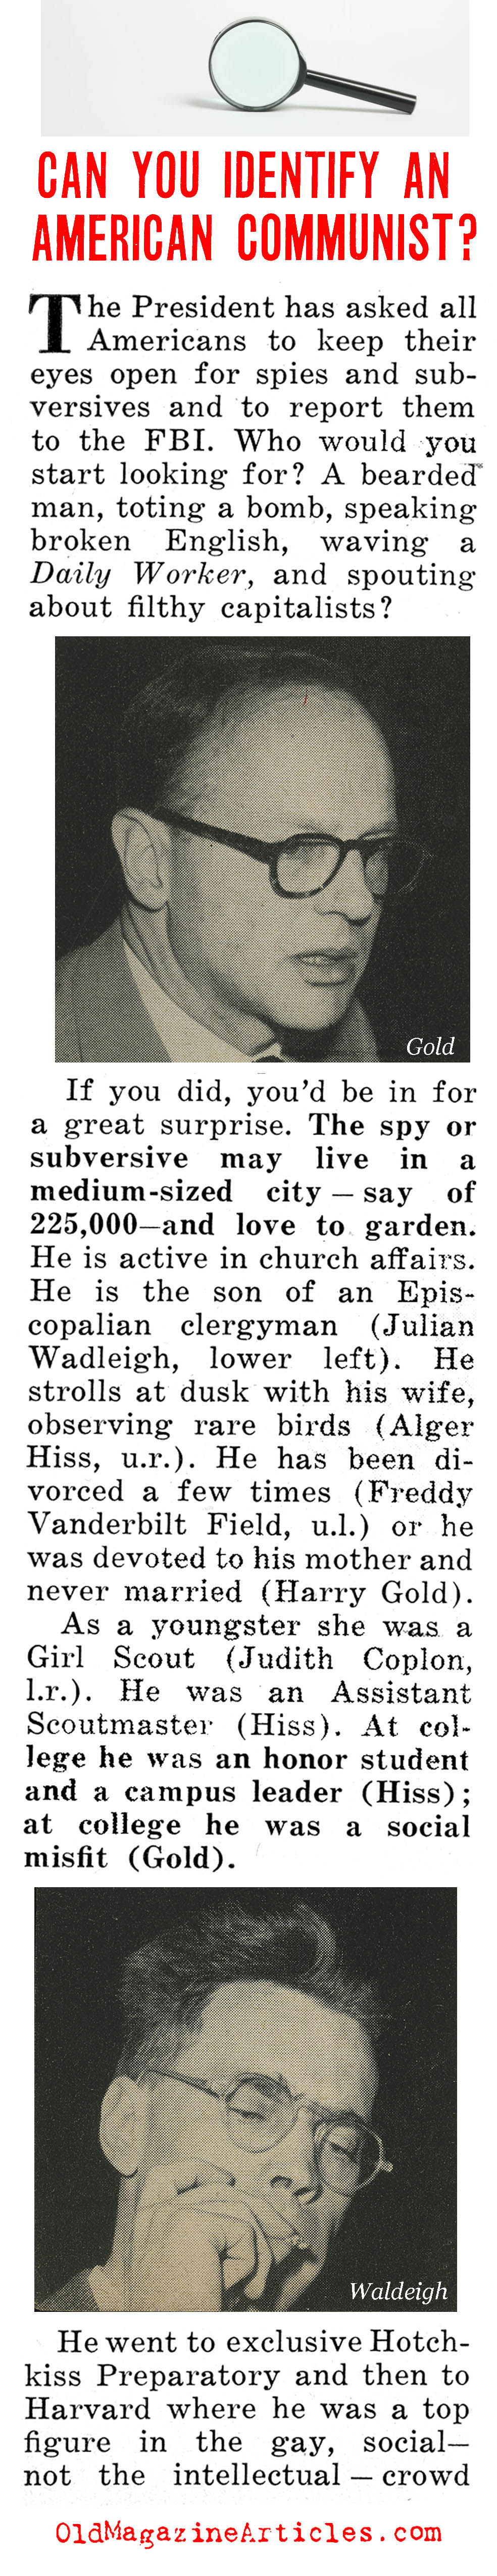 Can You Spot a Red? (People Today Magazine, 1950)